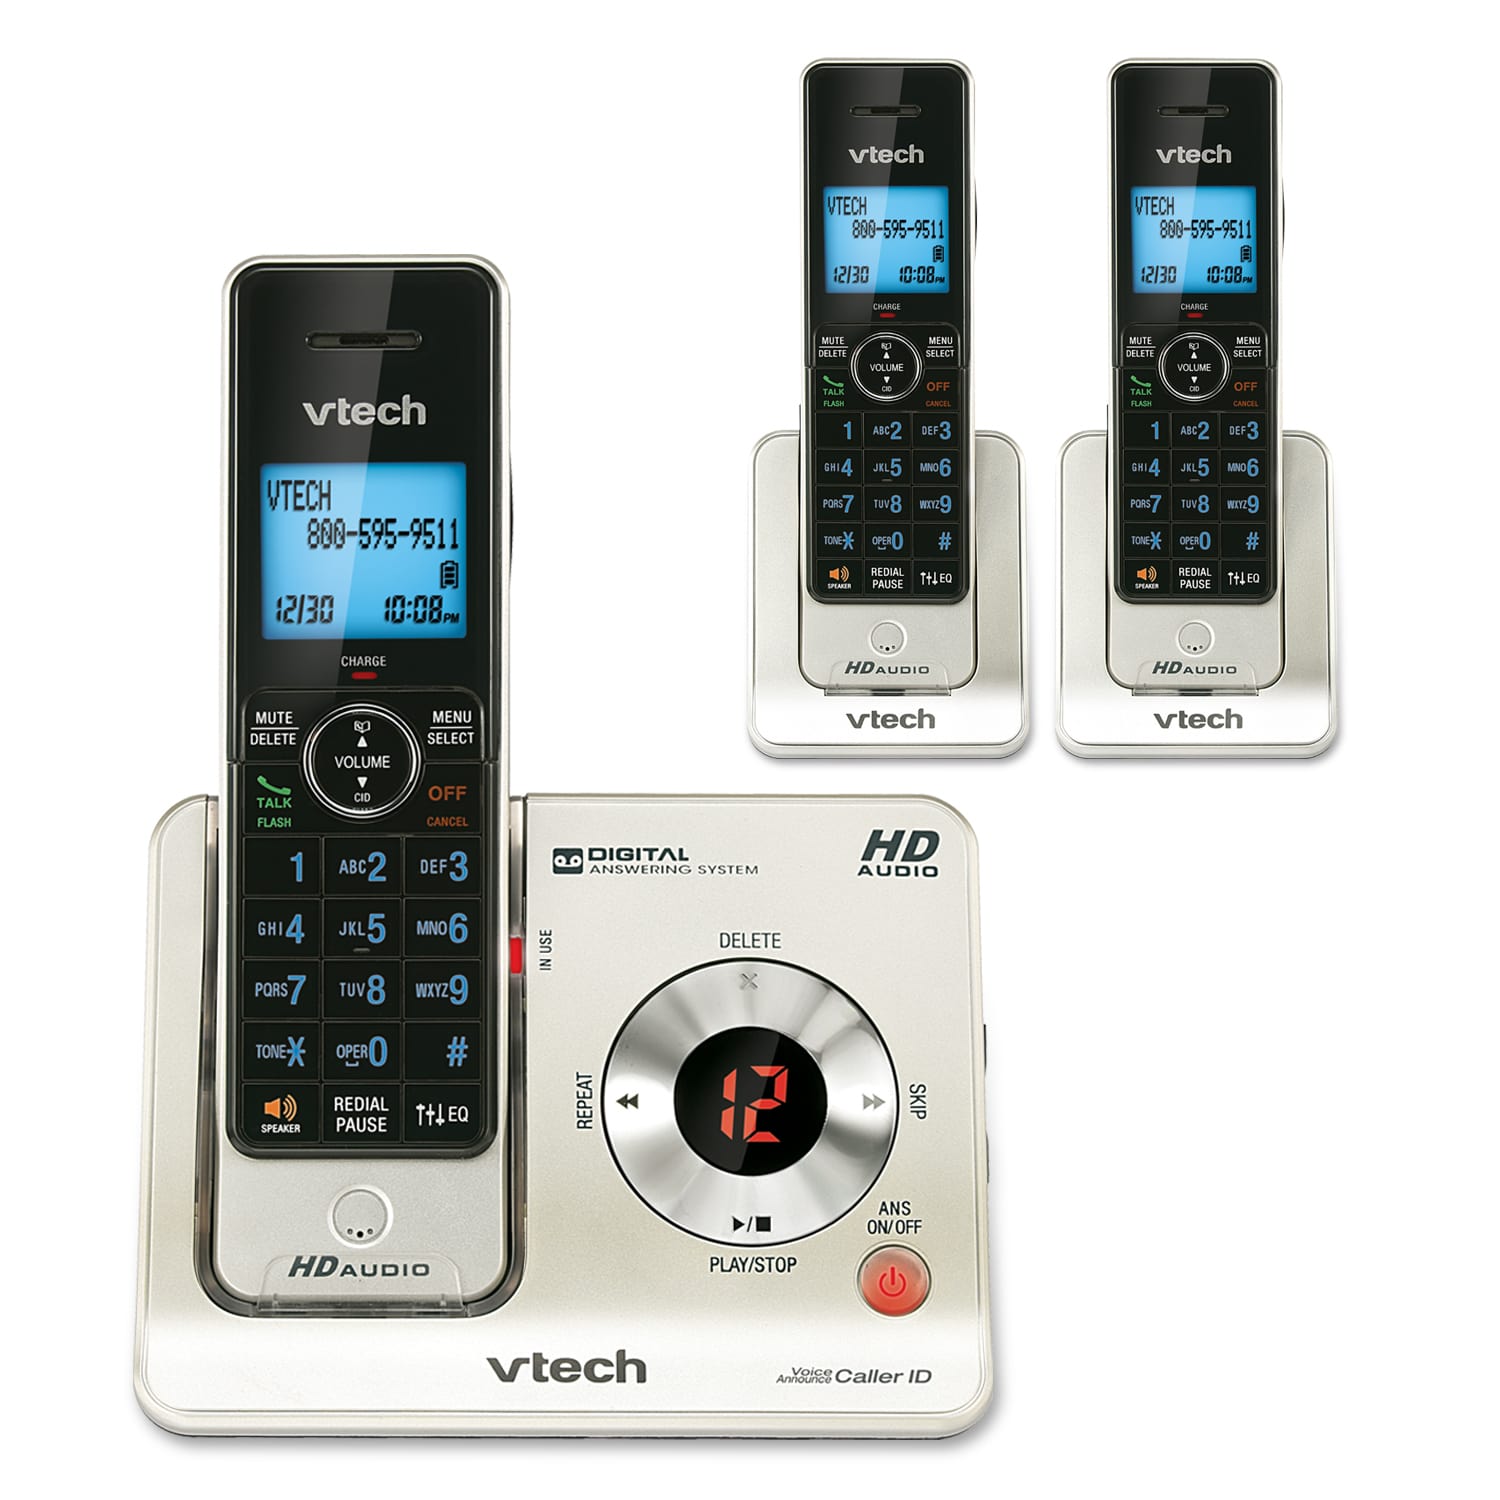 3 Handset Answering System with Caller ID/Call Waiting